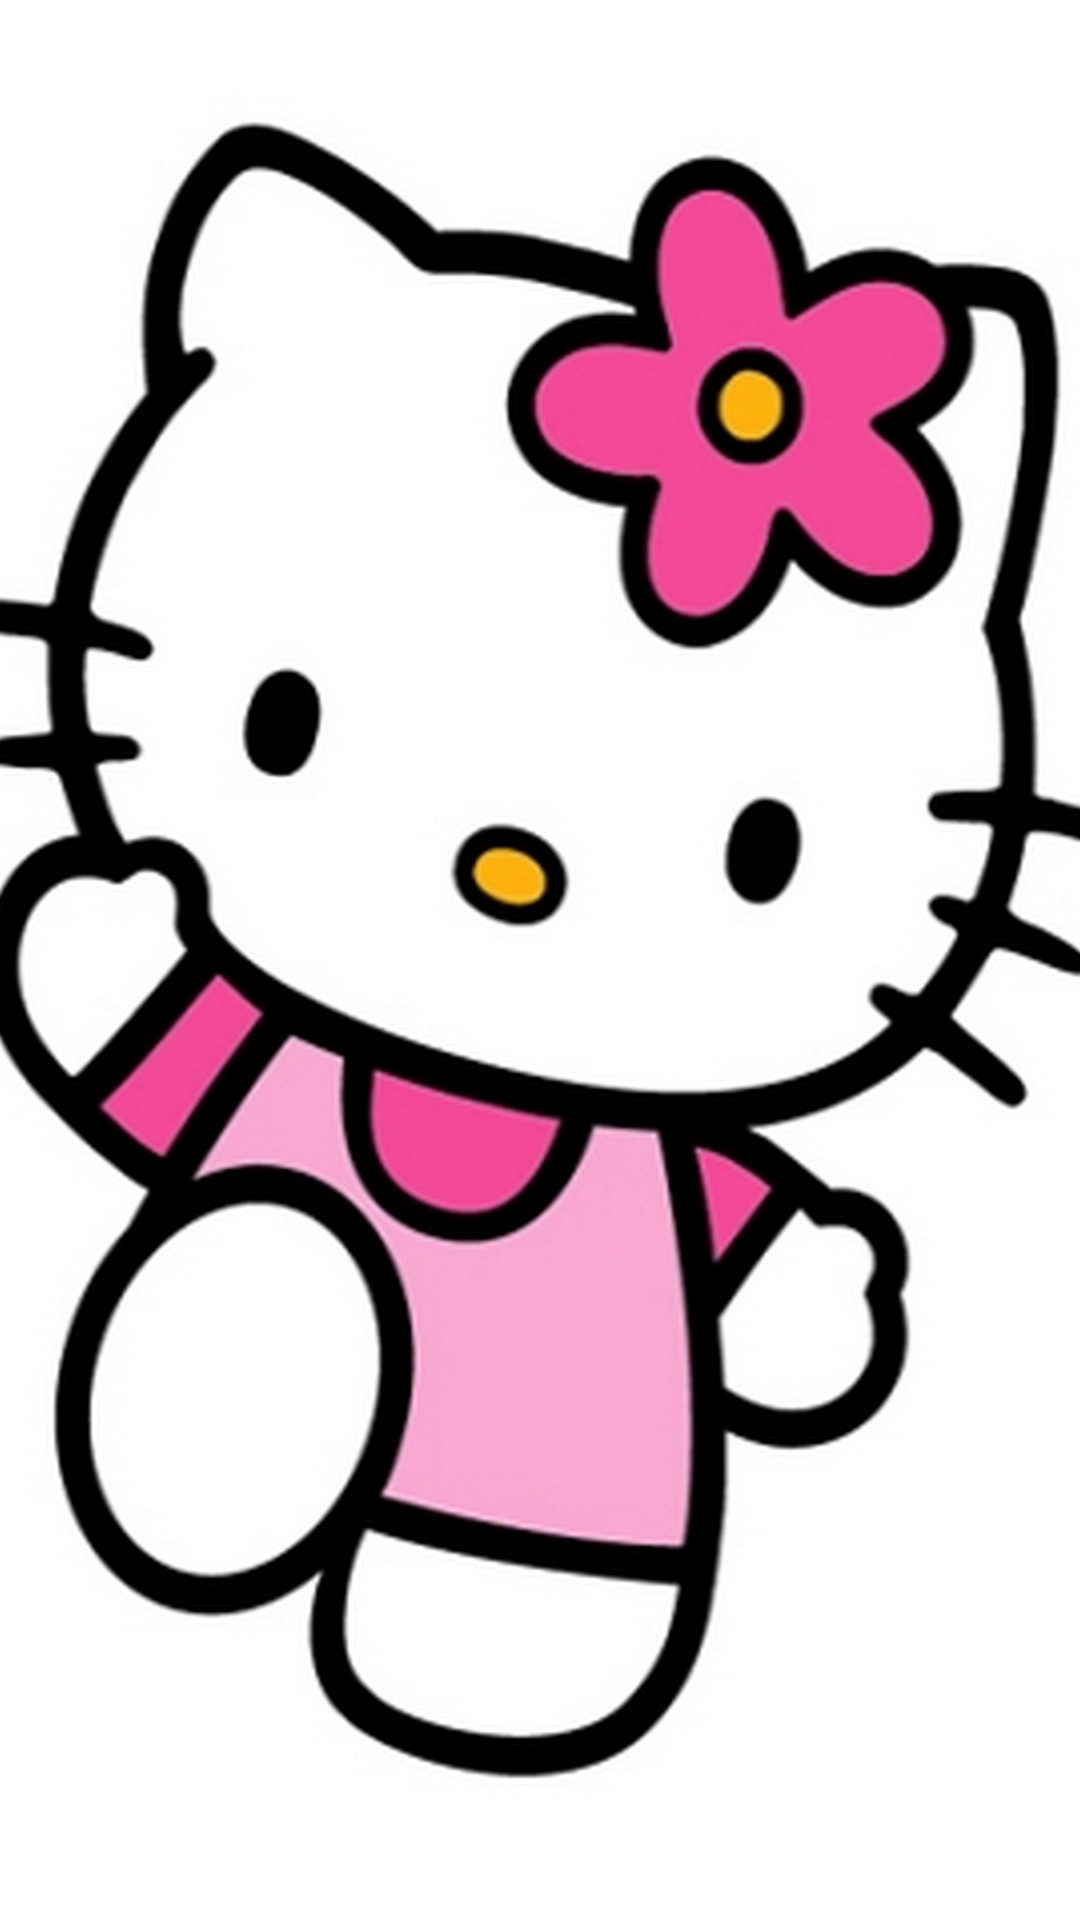 Wallpaper Hello Kitty Mobile with image resolution 1080x1920 pixel. You can make this wallpaper for your Desktop Computer Backgrounds, Mac Wallpapers, Android Lock screen or iPhone Screensavers